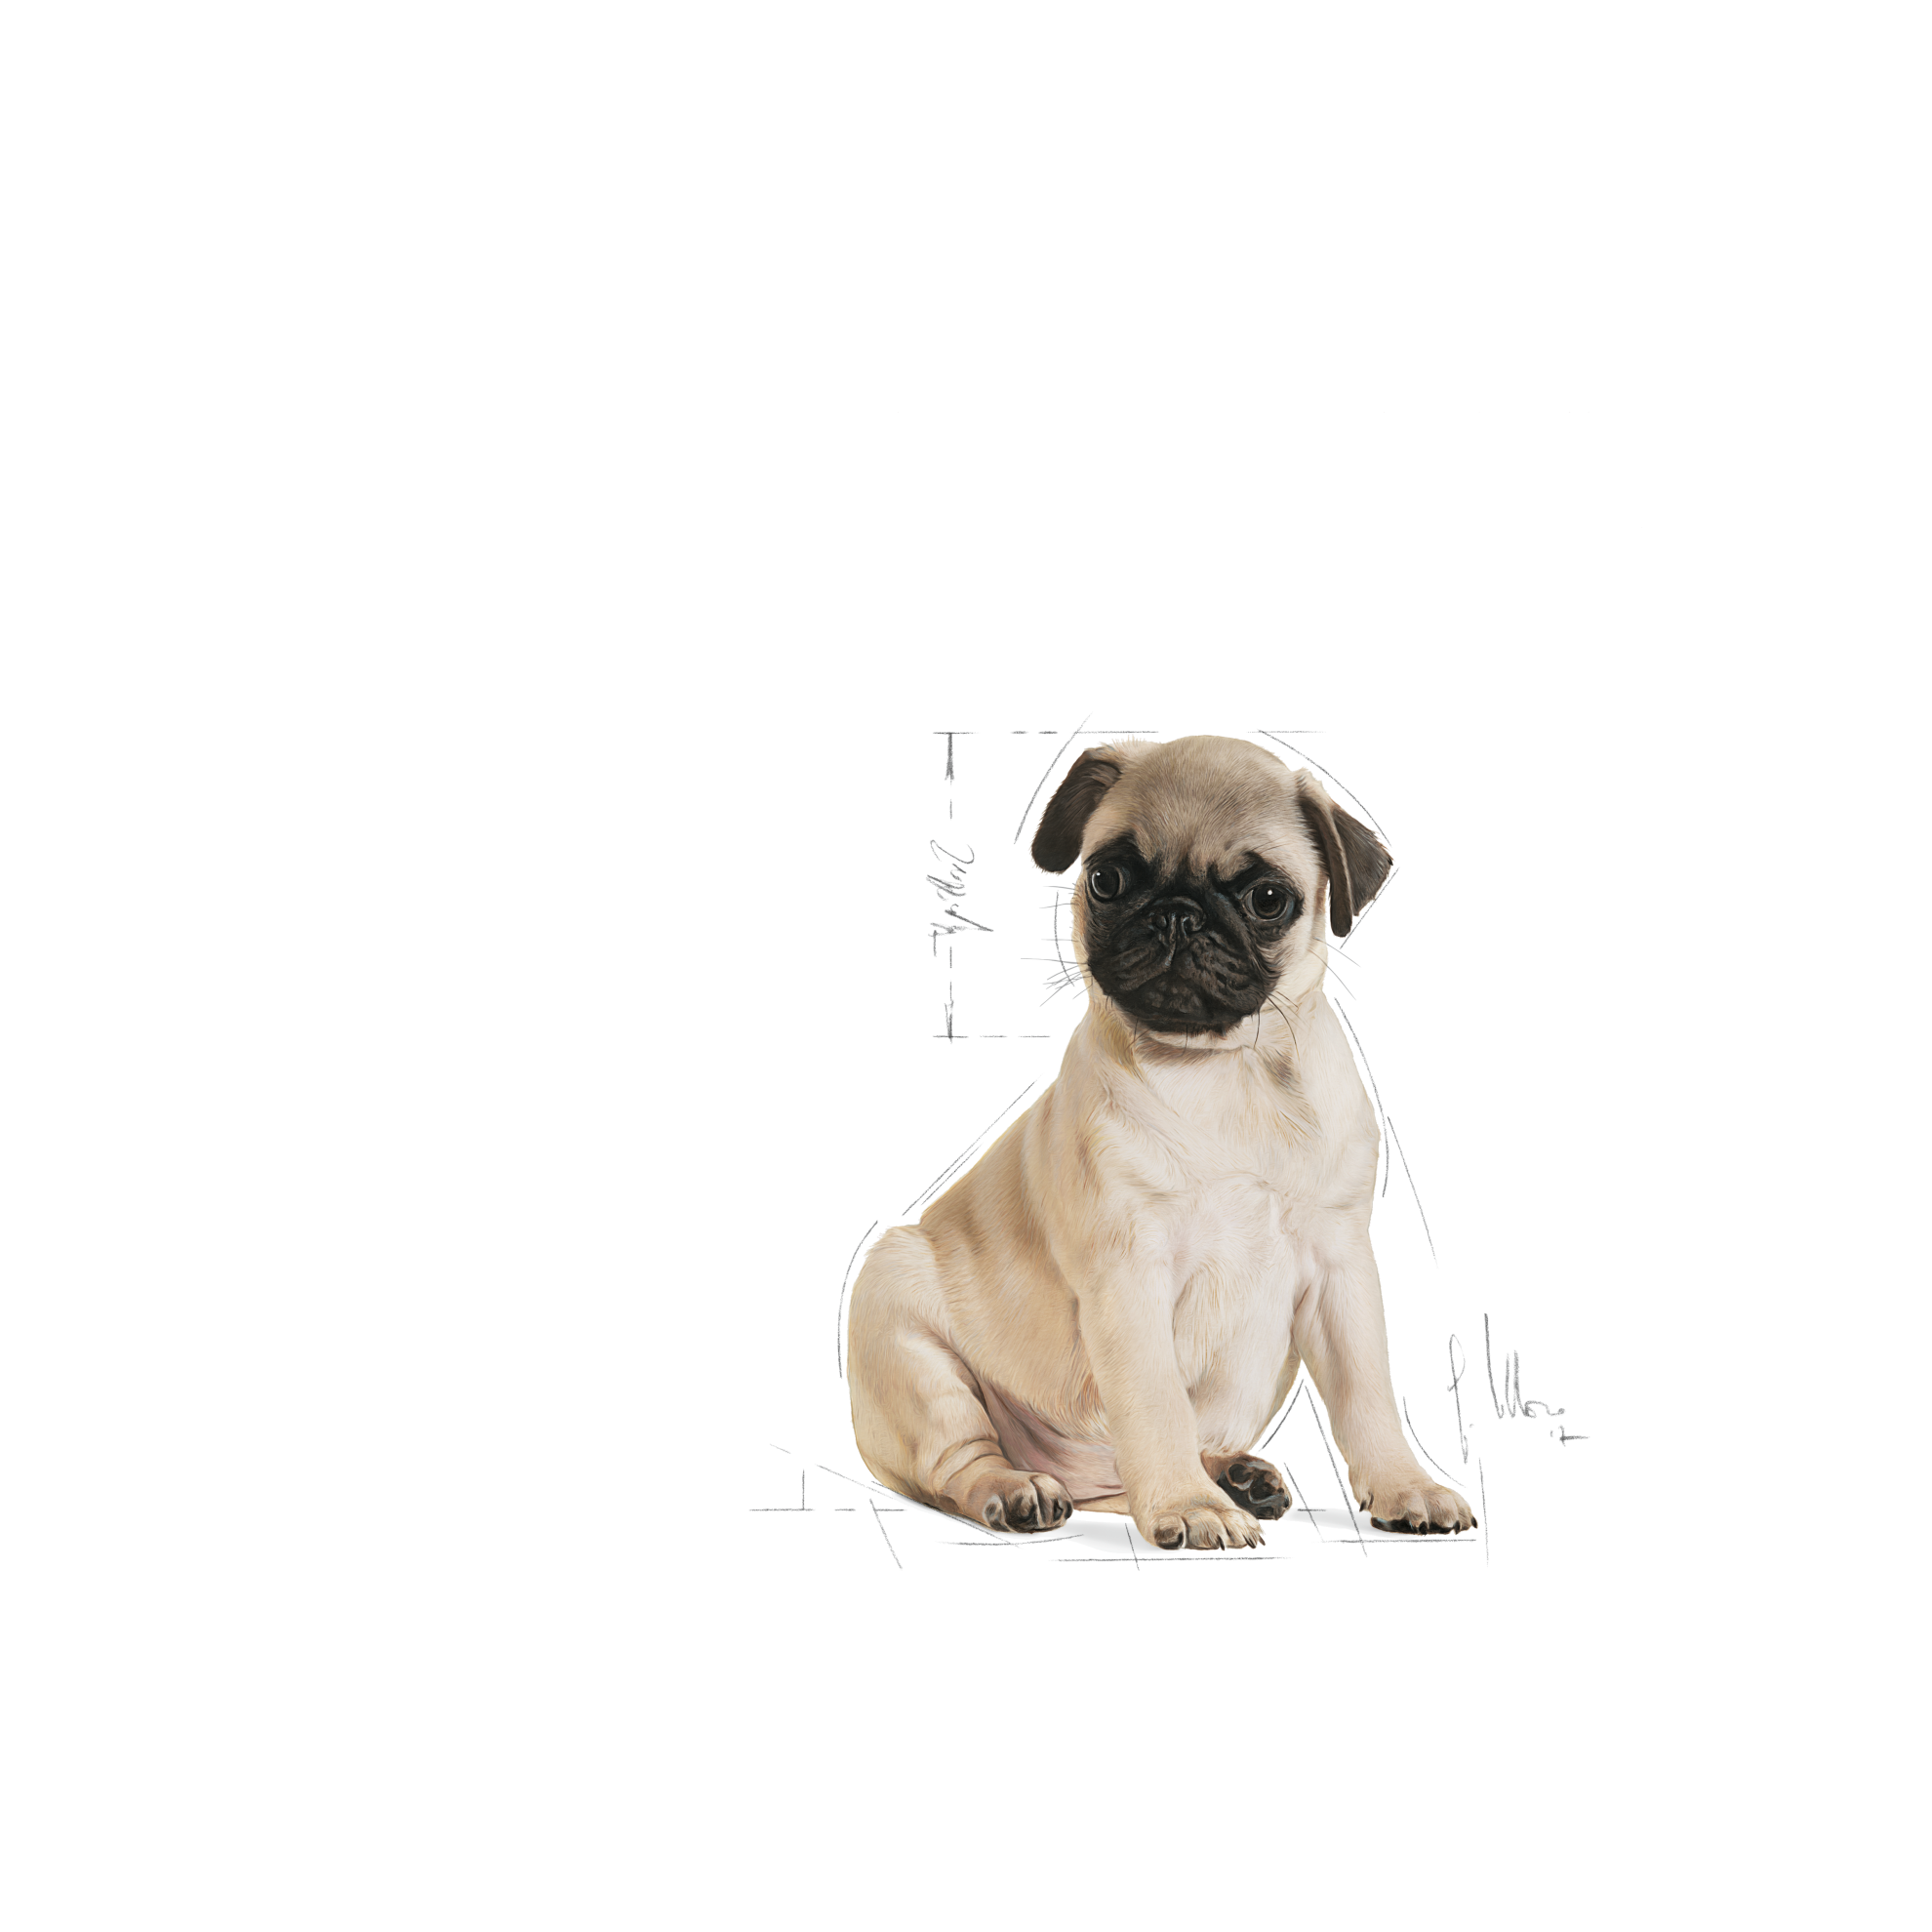 local pug puppies for sale